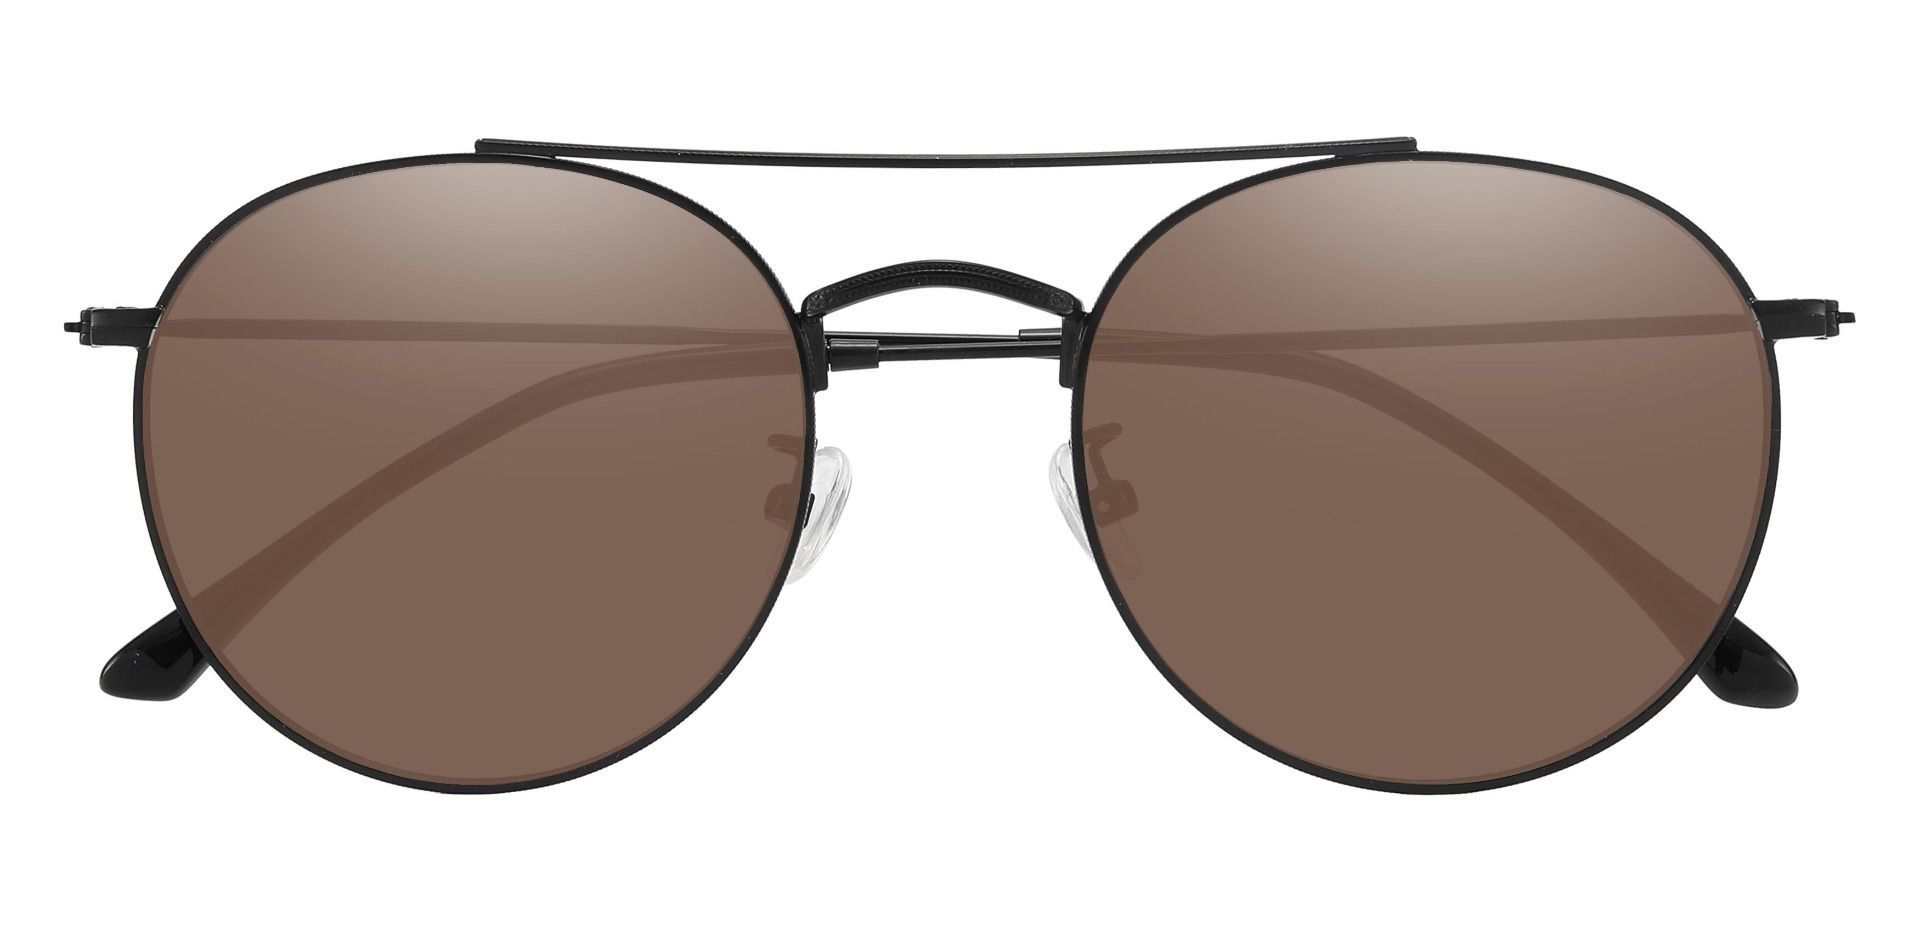 Junction Aviator Non-Rx Sunglasses - Black Frame With Brown Lenses